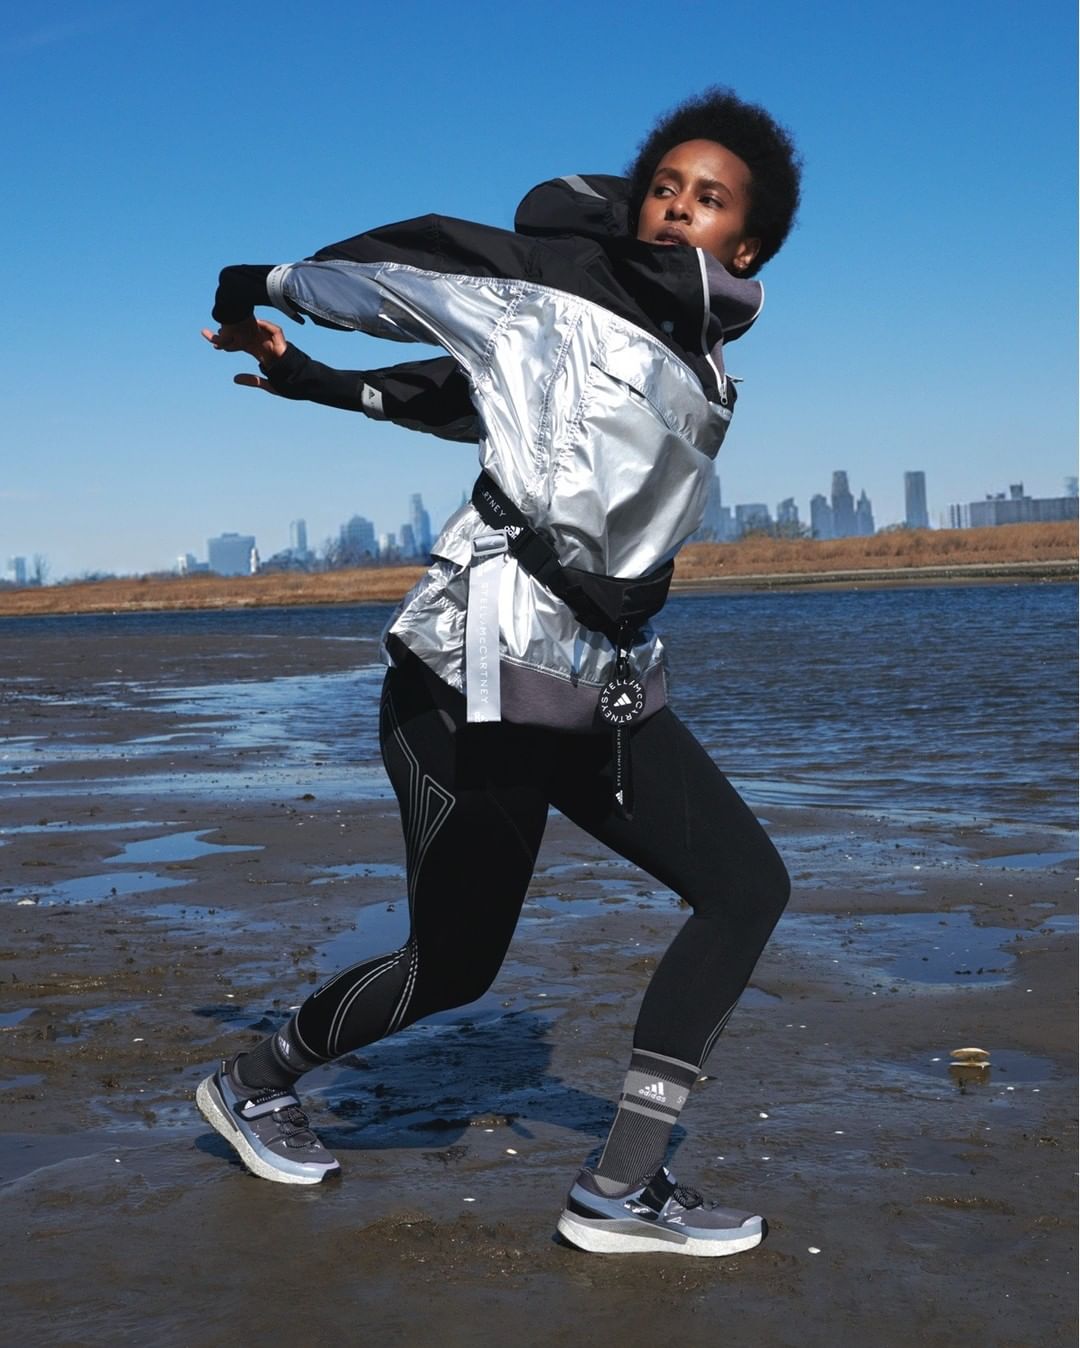 Stella McCartney - The latest drop from #aSMC, Winter Capsule uses PRIMEBLUE, a high-performance recycled material made in part with Parley Ocean Plastic, and PRIMEGREEN, a series of high-performance...